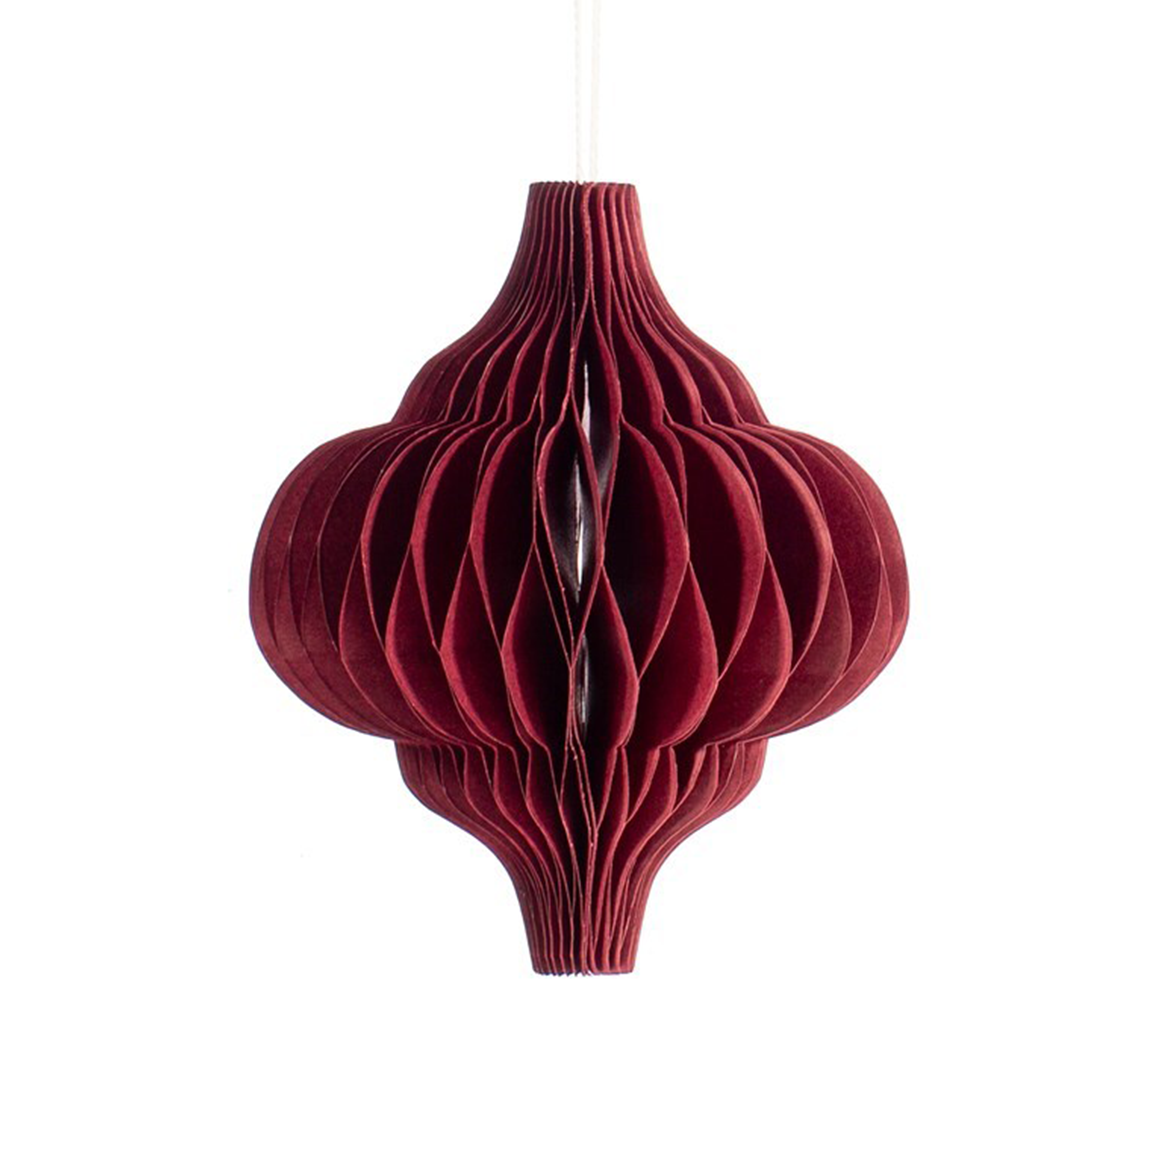 dark red paper hanging decoration in the shape of a diamond. Hanging from string, honeycomb inside.